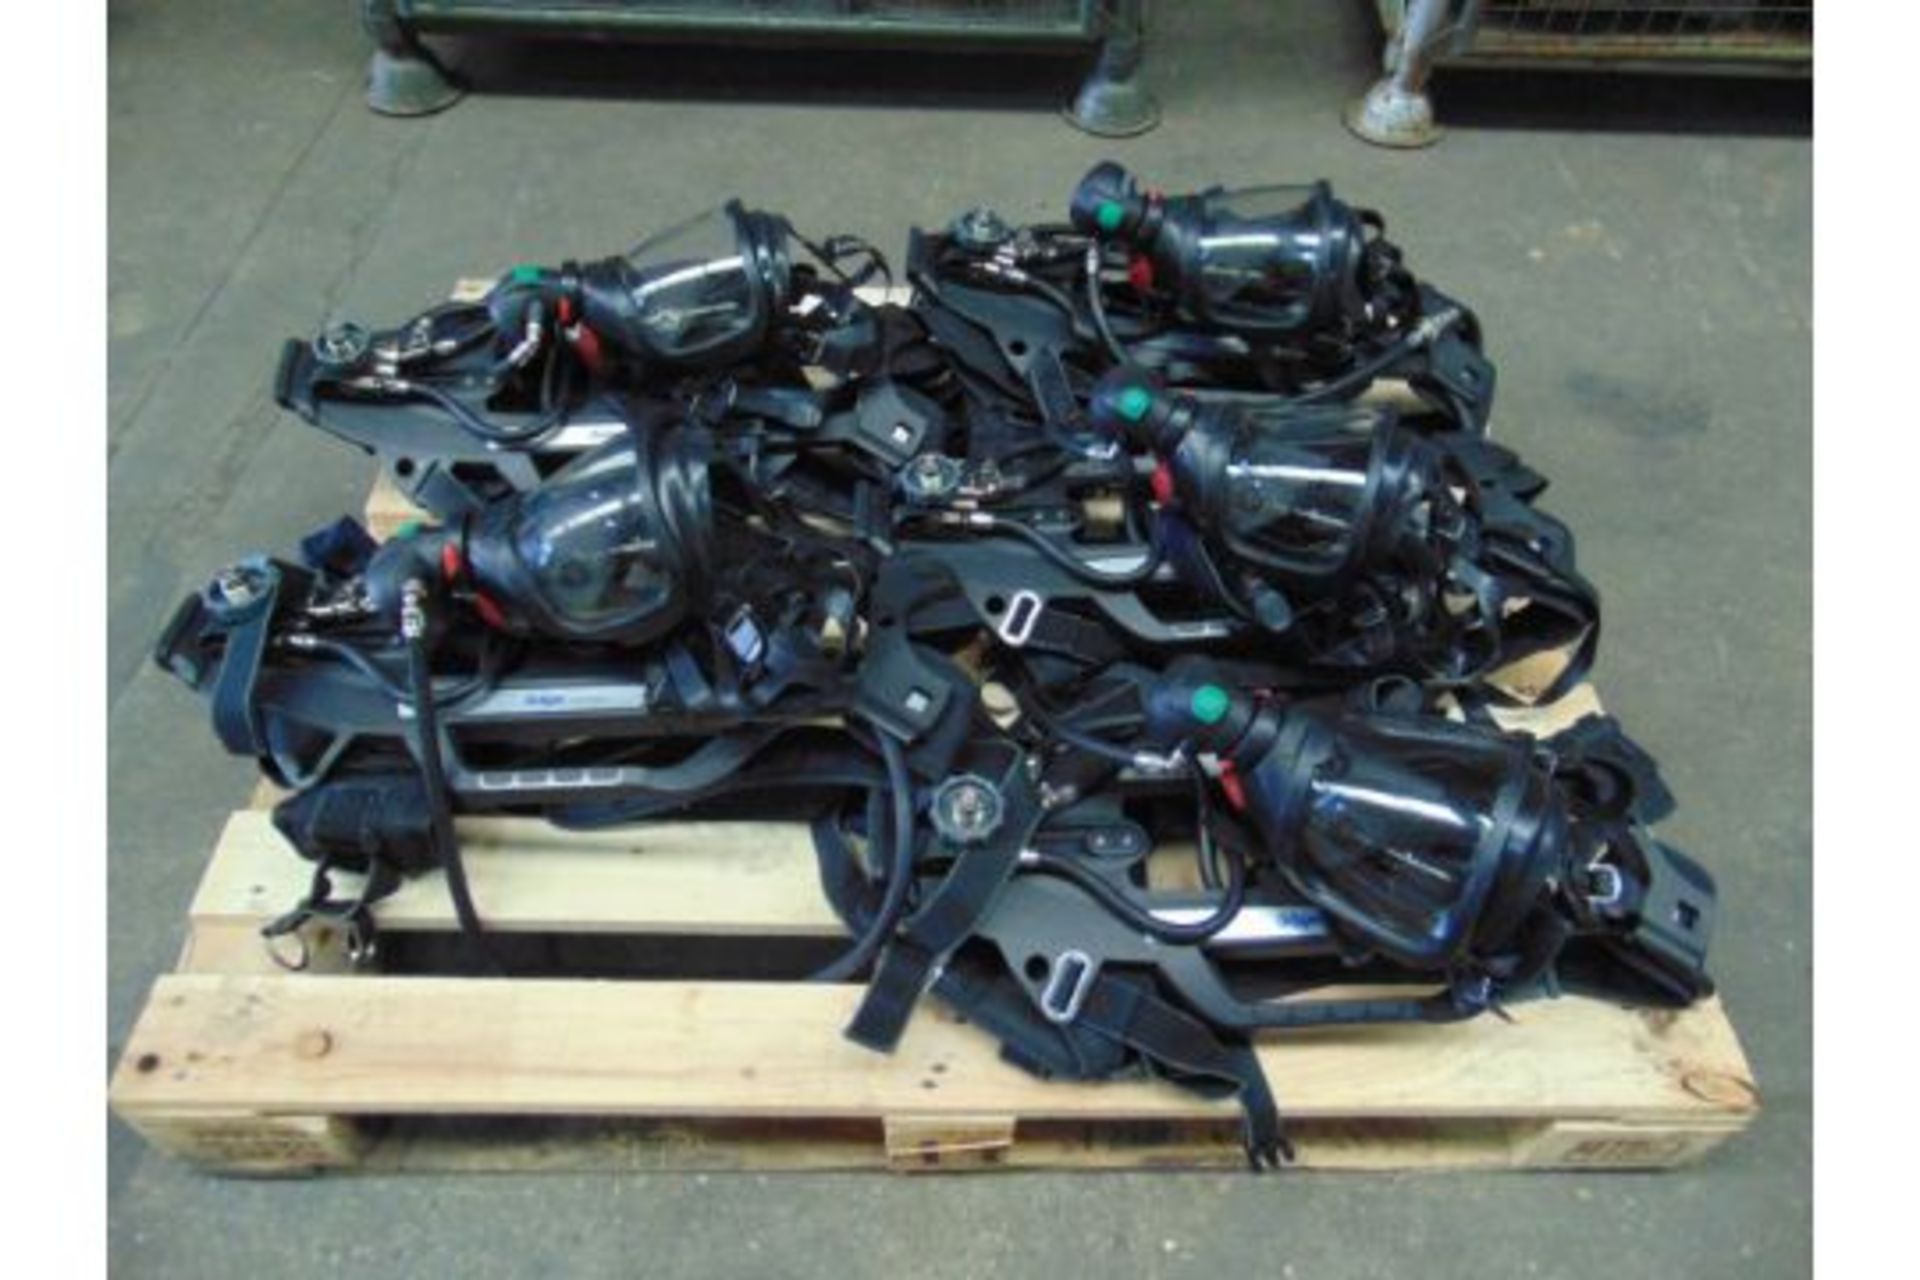 5 x Drager PSS 7000 Self Contained Breathing Apparatus w/ 10 x Drager 300 Bar Air Cylinders - Image 9 of 20